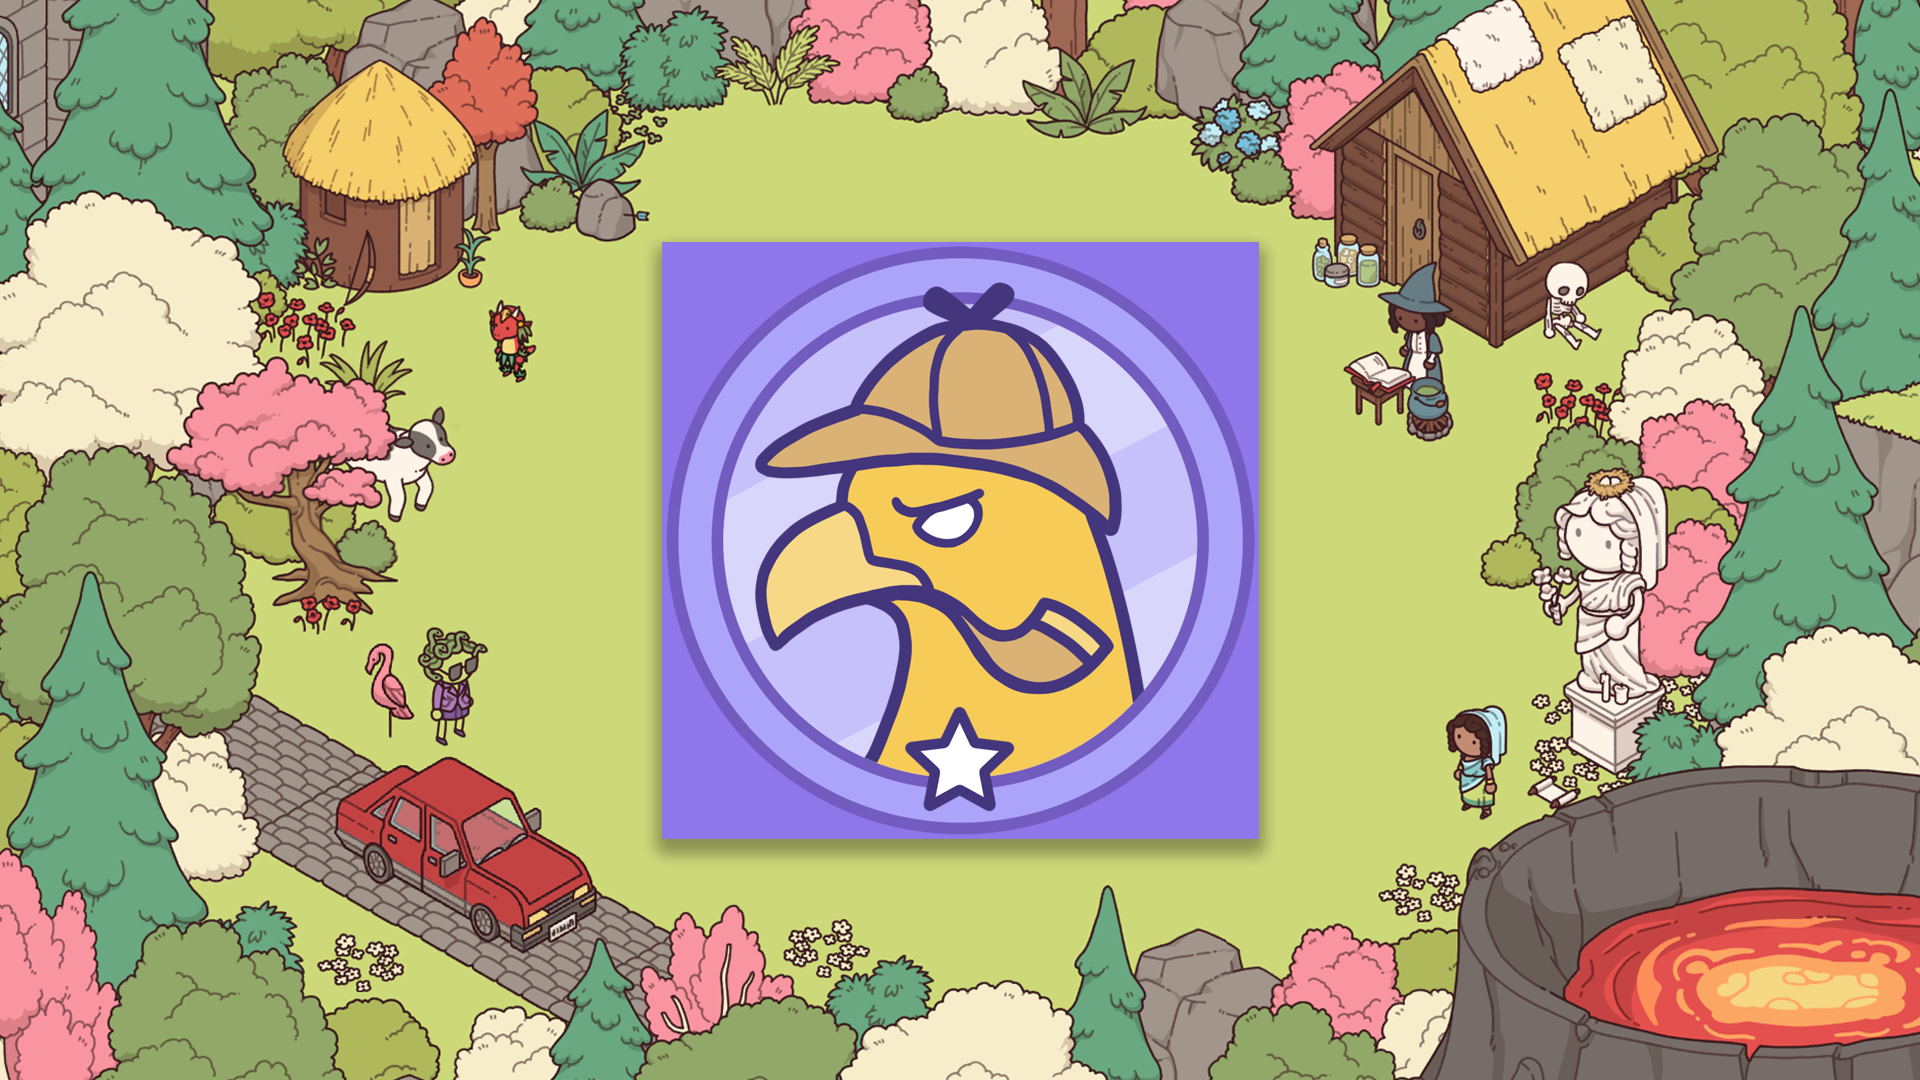 Icon for Master Detective